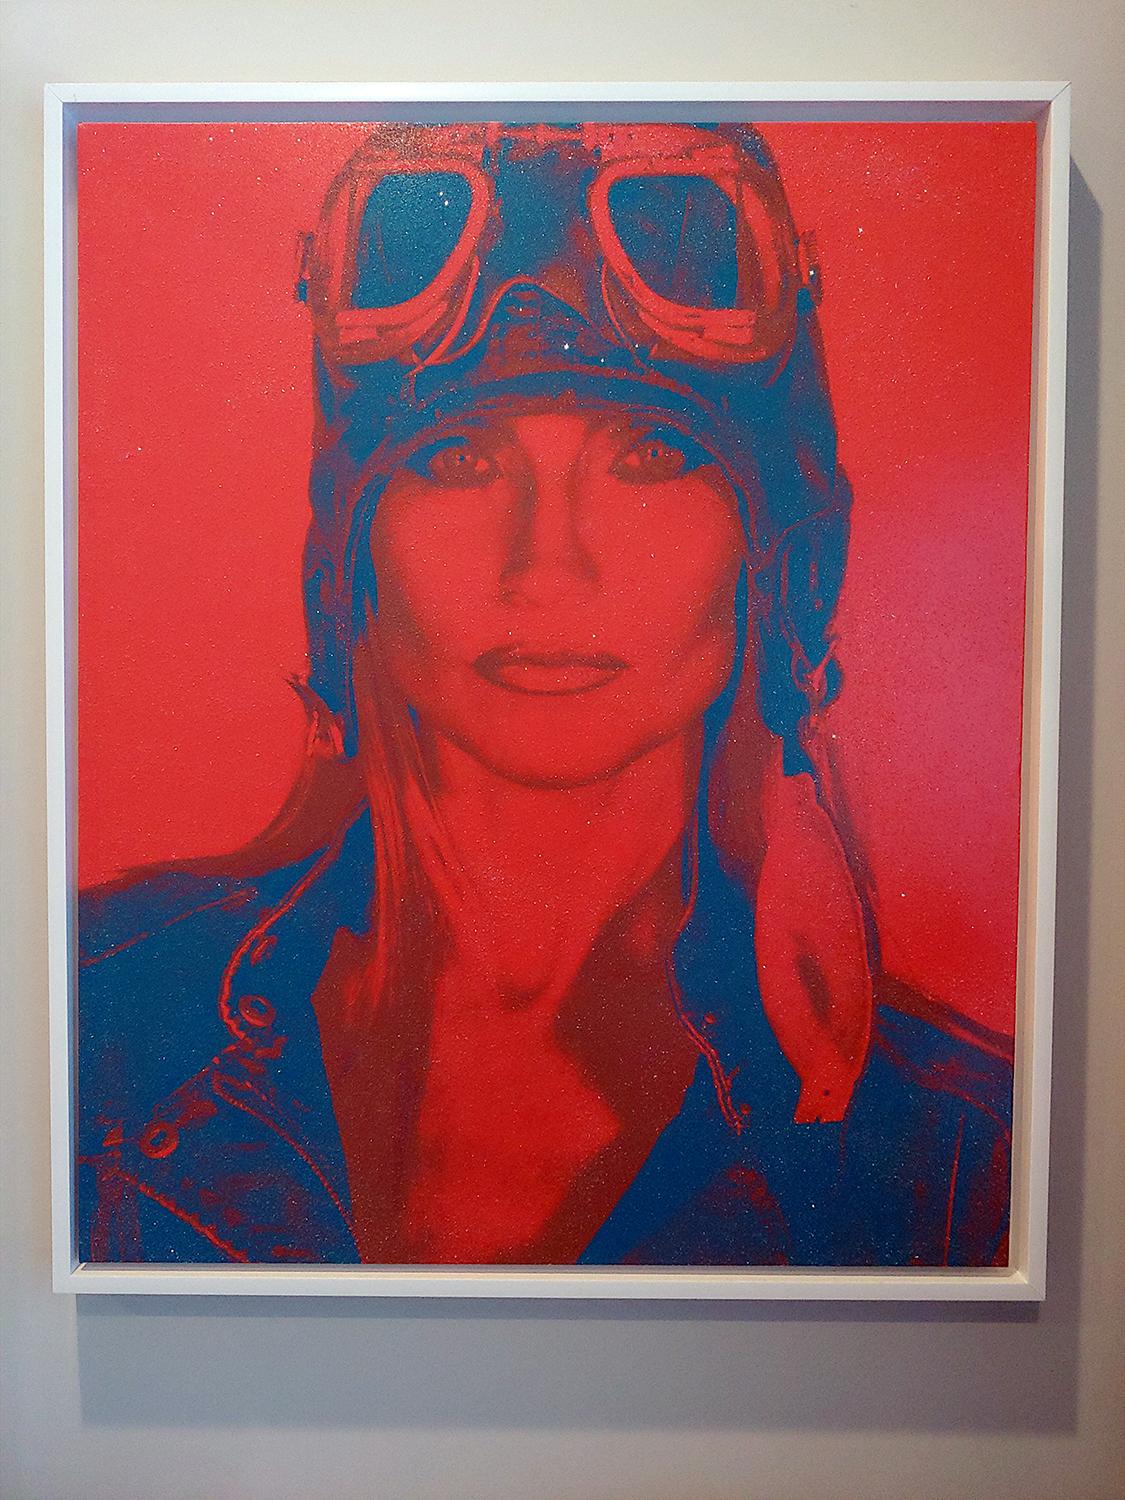 AVIATRIX Red and Blue Diamond Dust on Canvas - Pop Art Painting by Ceravolo